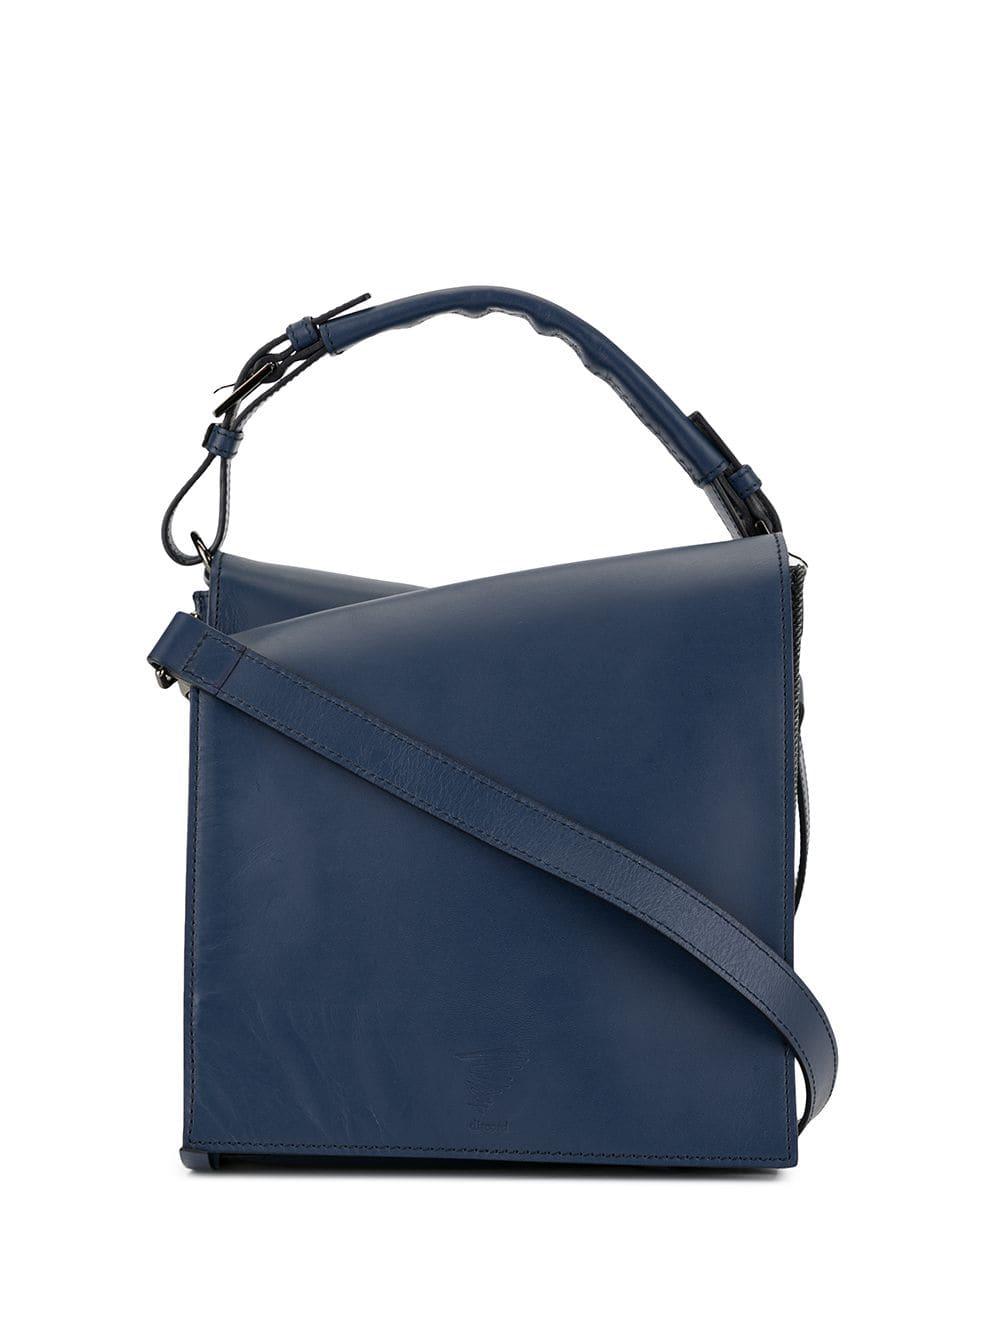 Discord Yohji Yamamoto Leather Double Structured Shoulder Bag in Blue ...